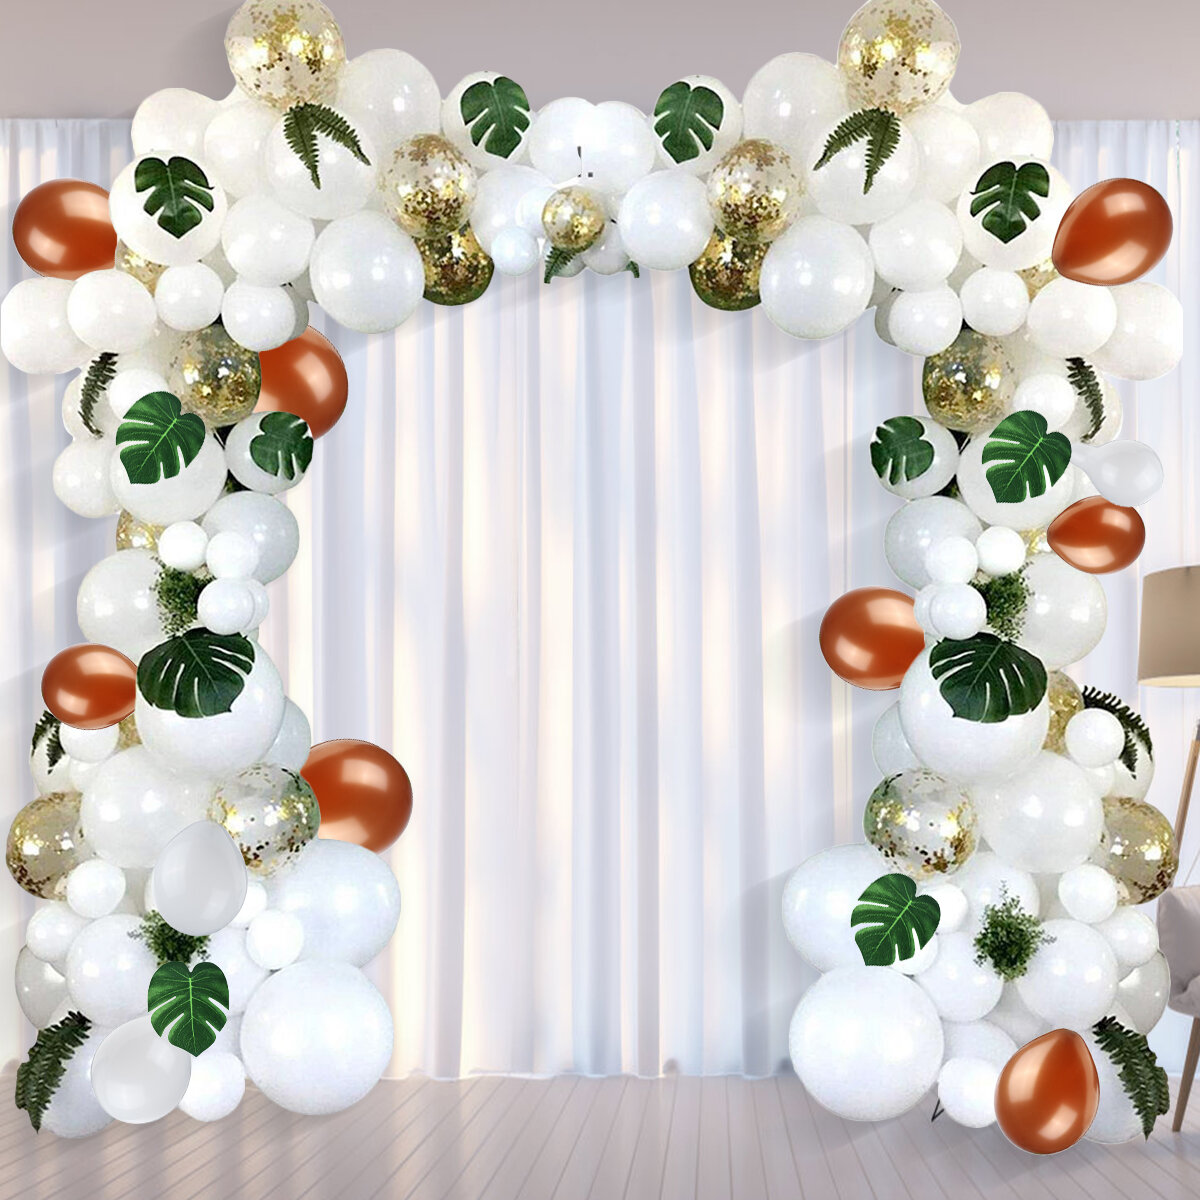 98Pcs Balloon Arch Kit Set Birthday Wedding Baby Shower Hen Party Garland for Festival Decoration